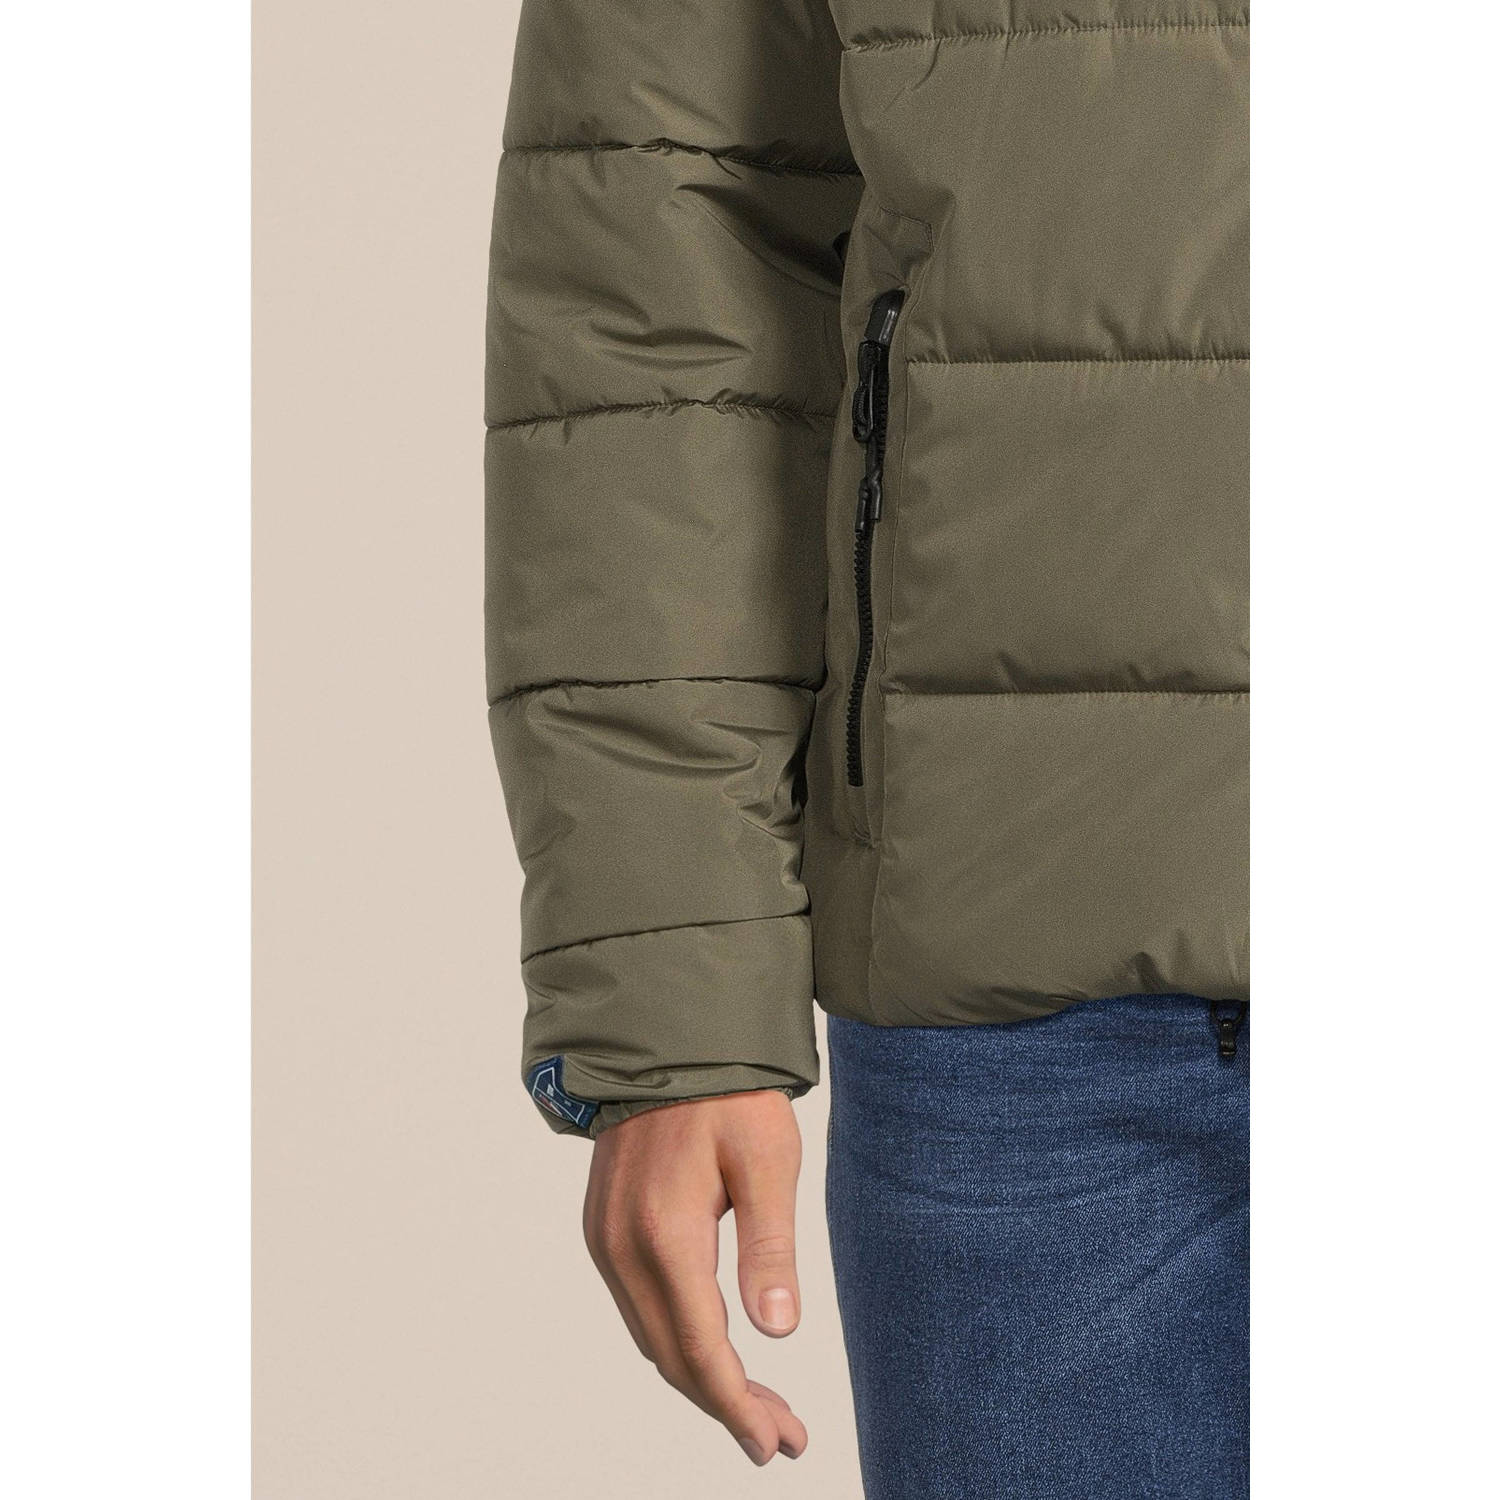 Superdry sports puffer jas dusty olive green